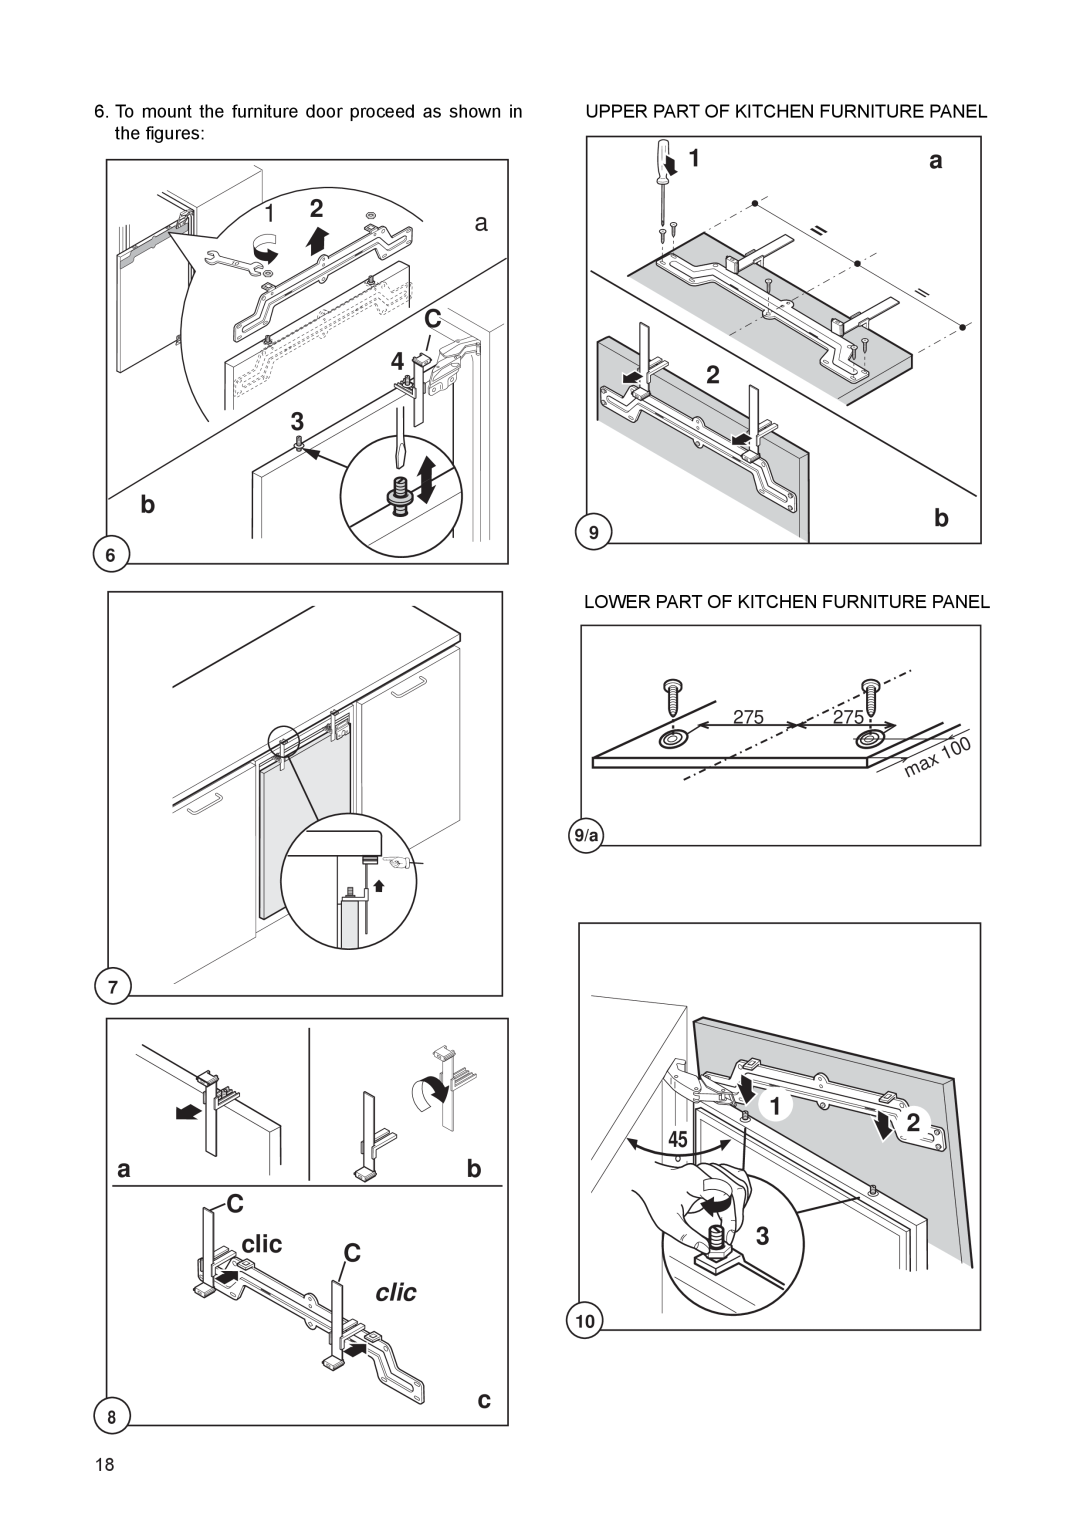 Electrolux FRF 120 manual clic, To mount the furniture door proceed as shown in the figures 